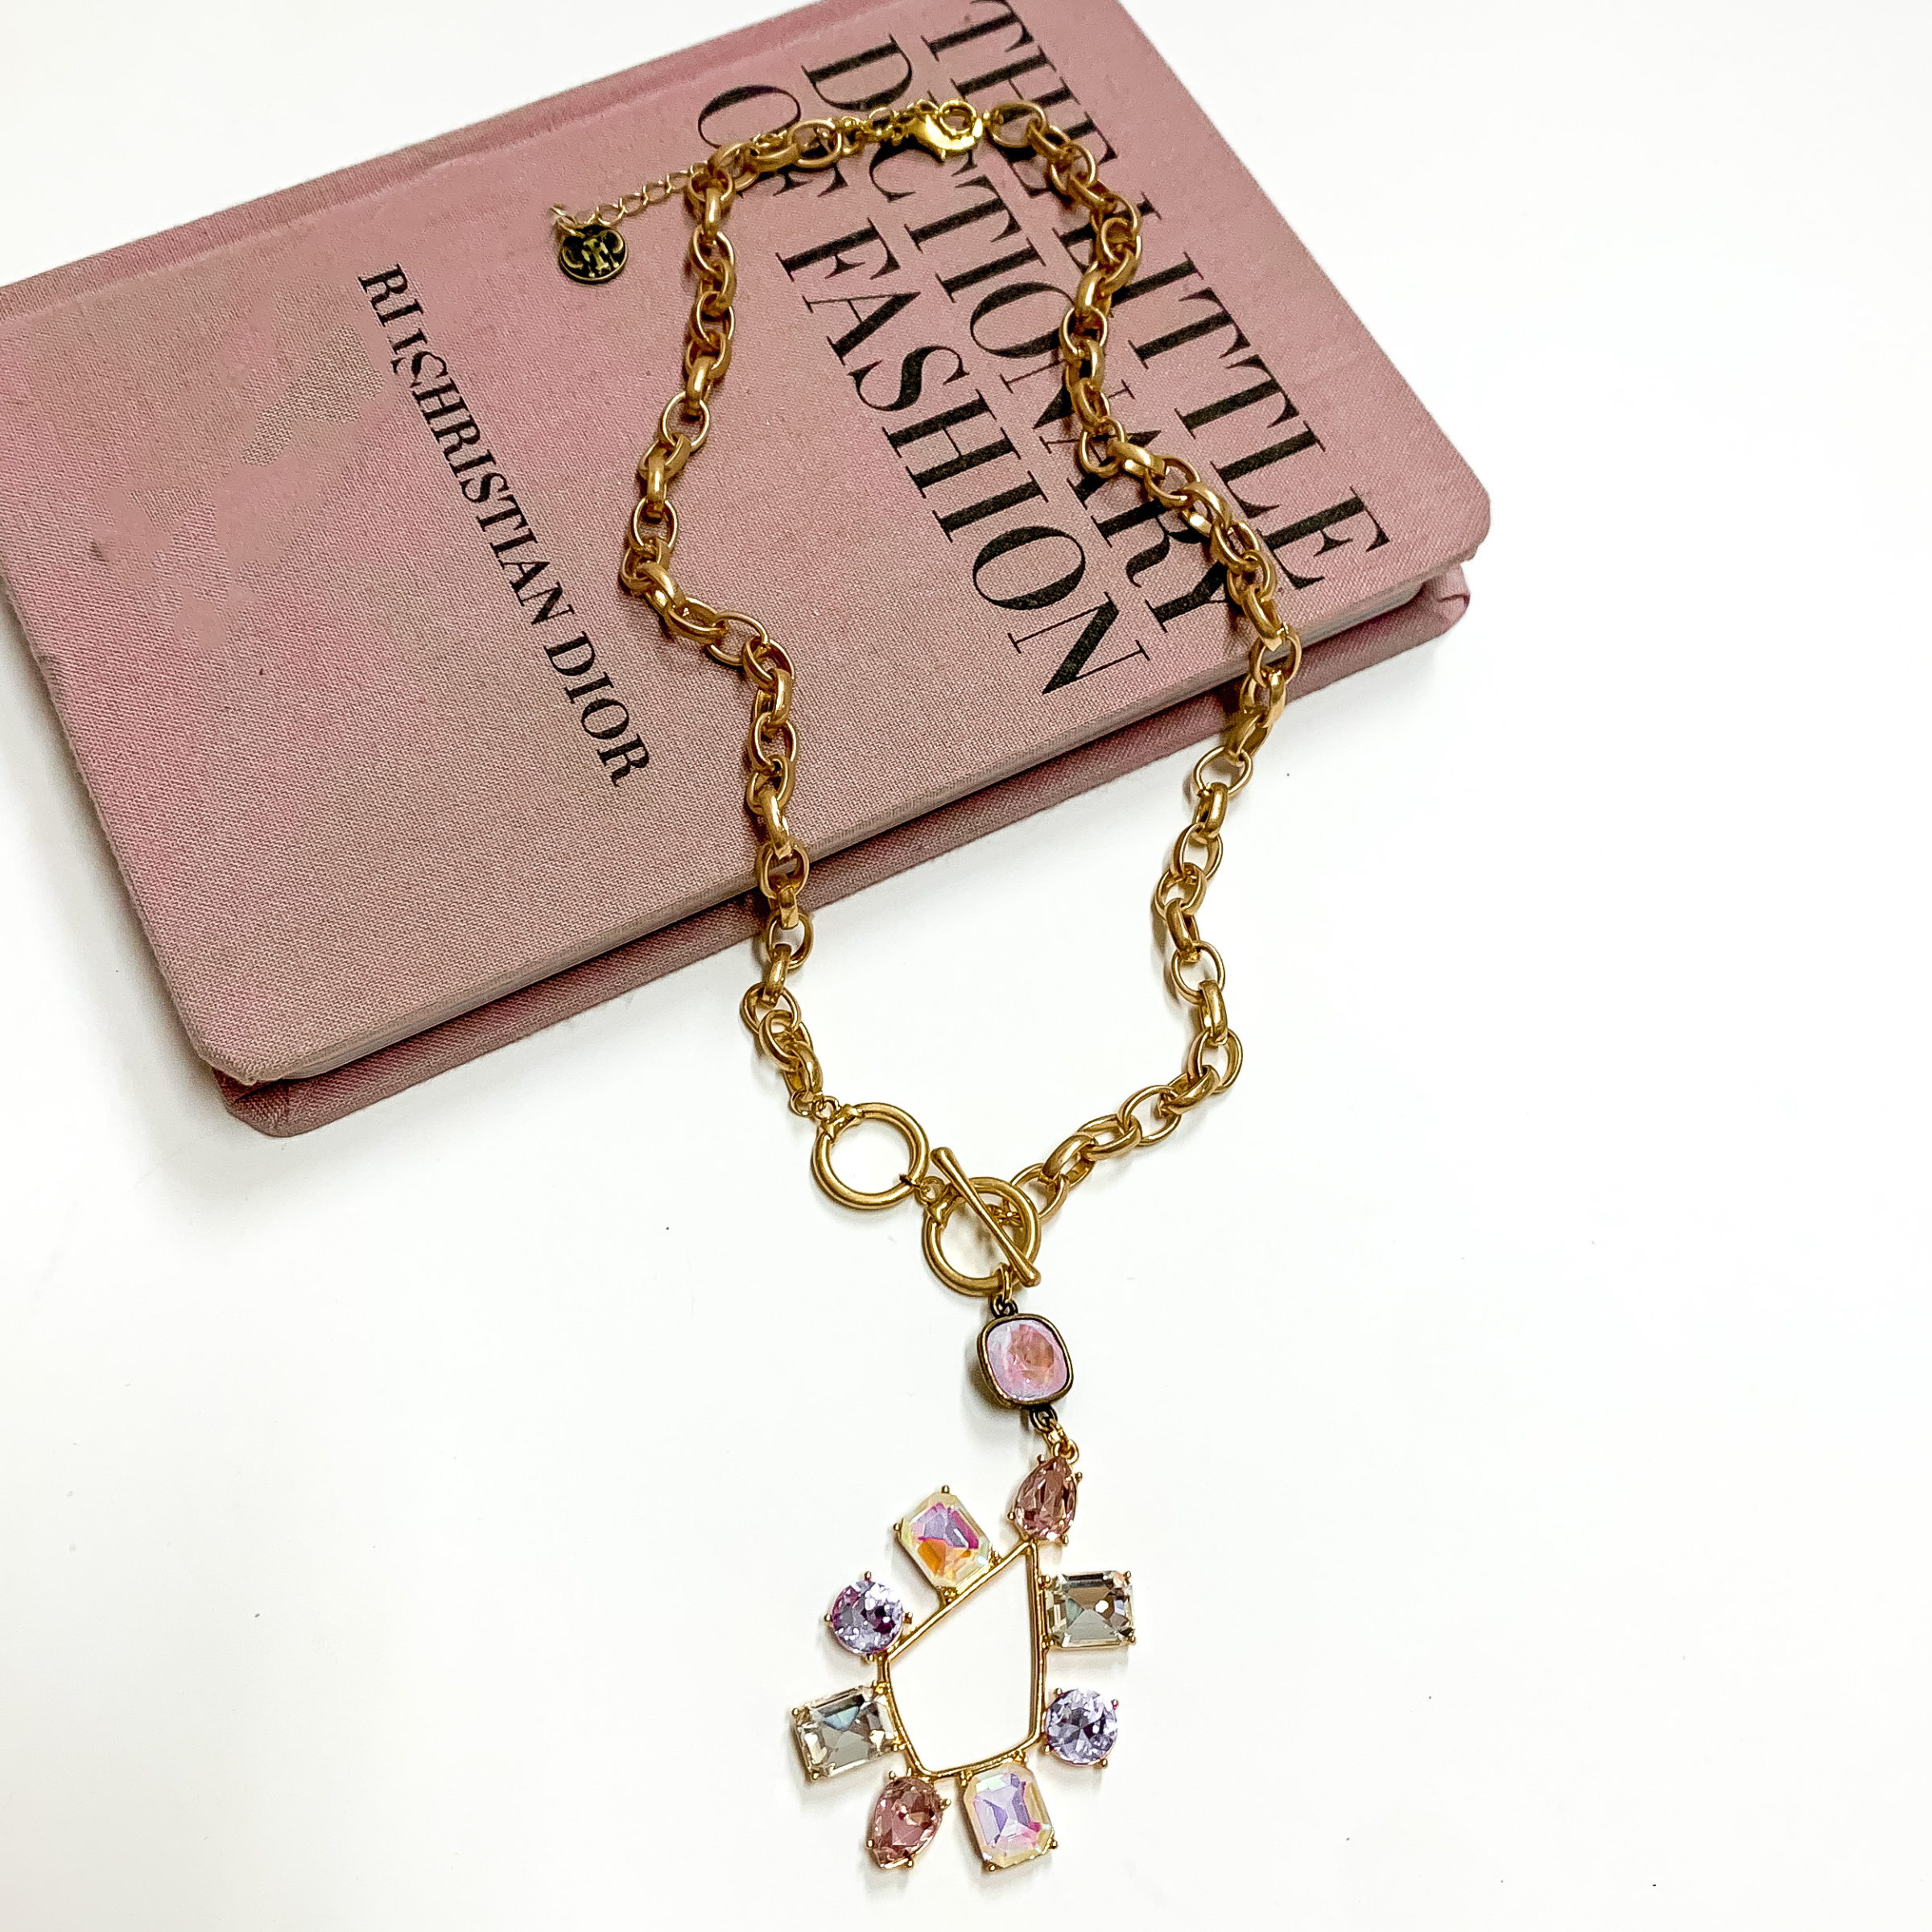 Pink Panache | Gold Tone Chain Necklace with a Lavender Crystal Drop and Multicolor Crystal Teardrop Pendant - Giddy Up Glamour Boutique